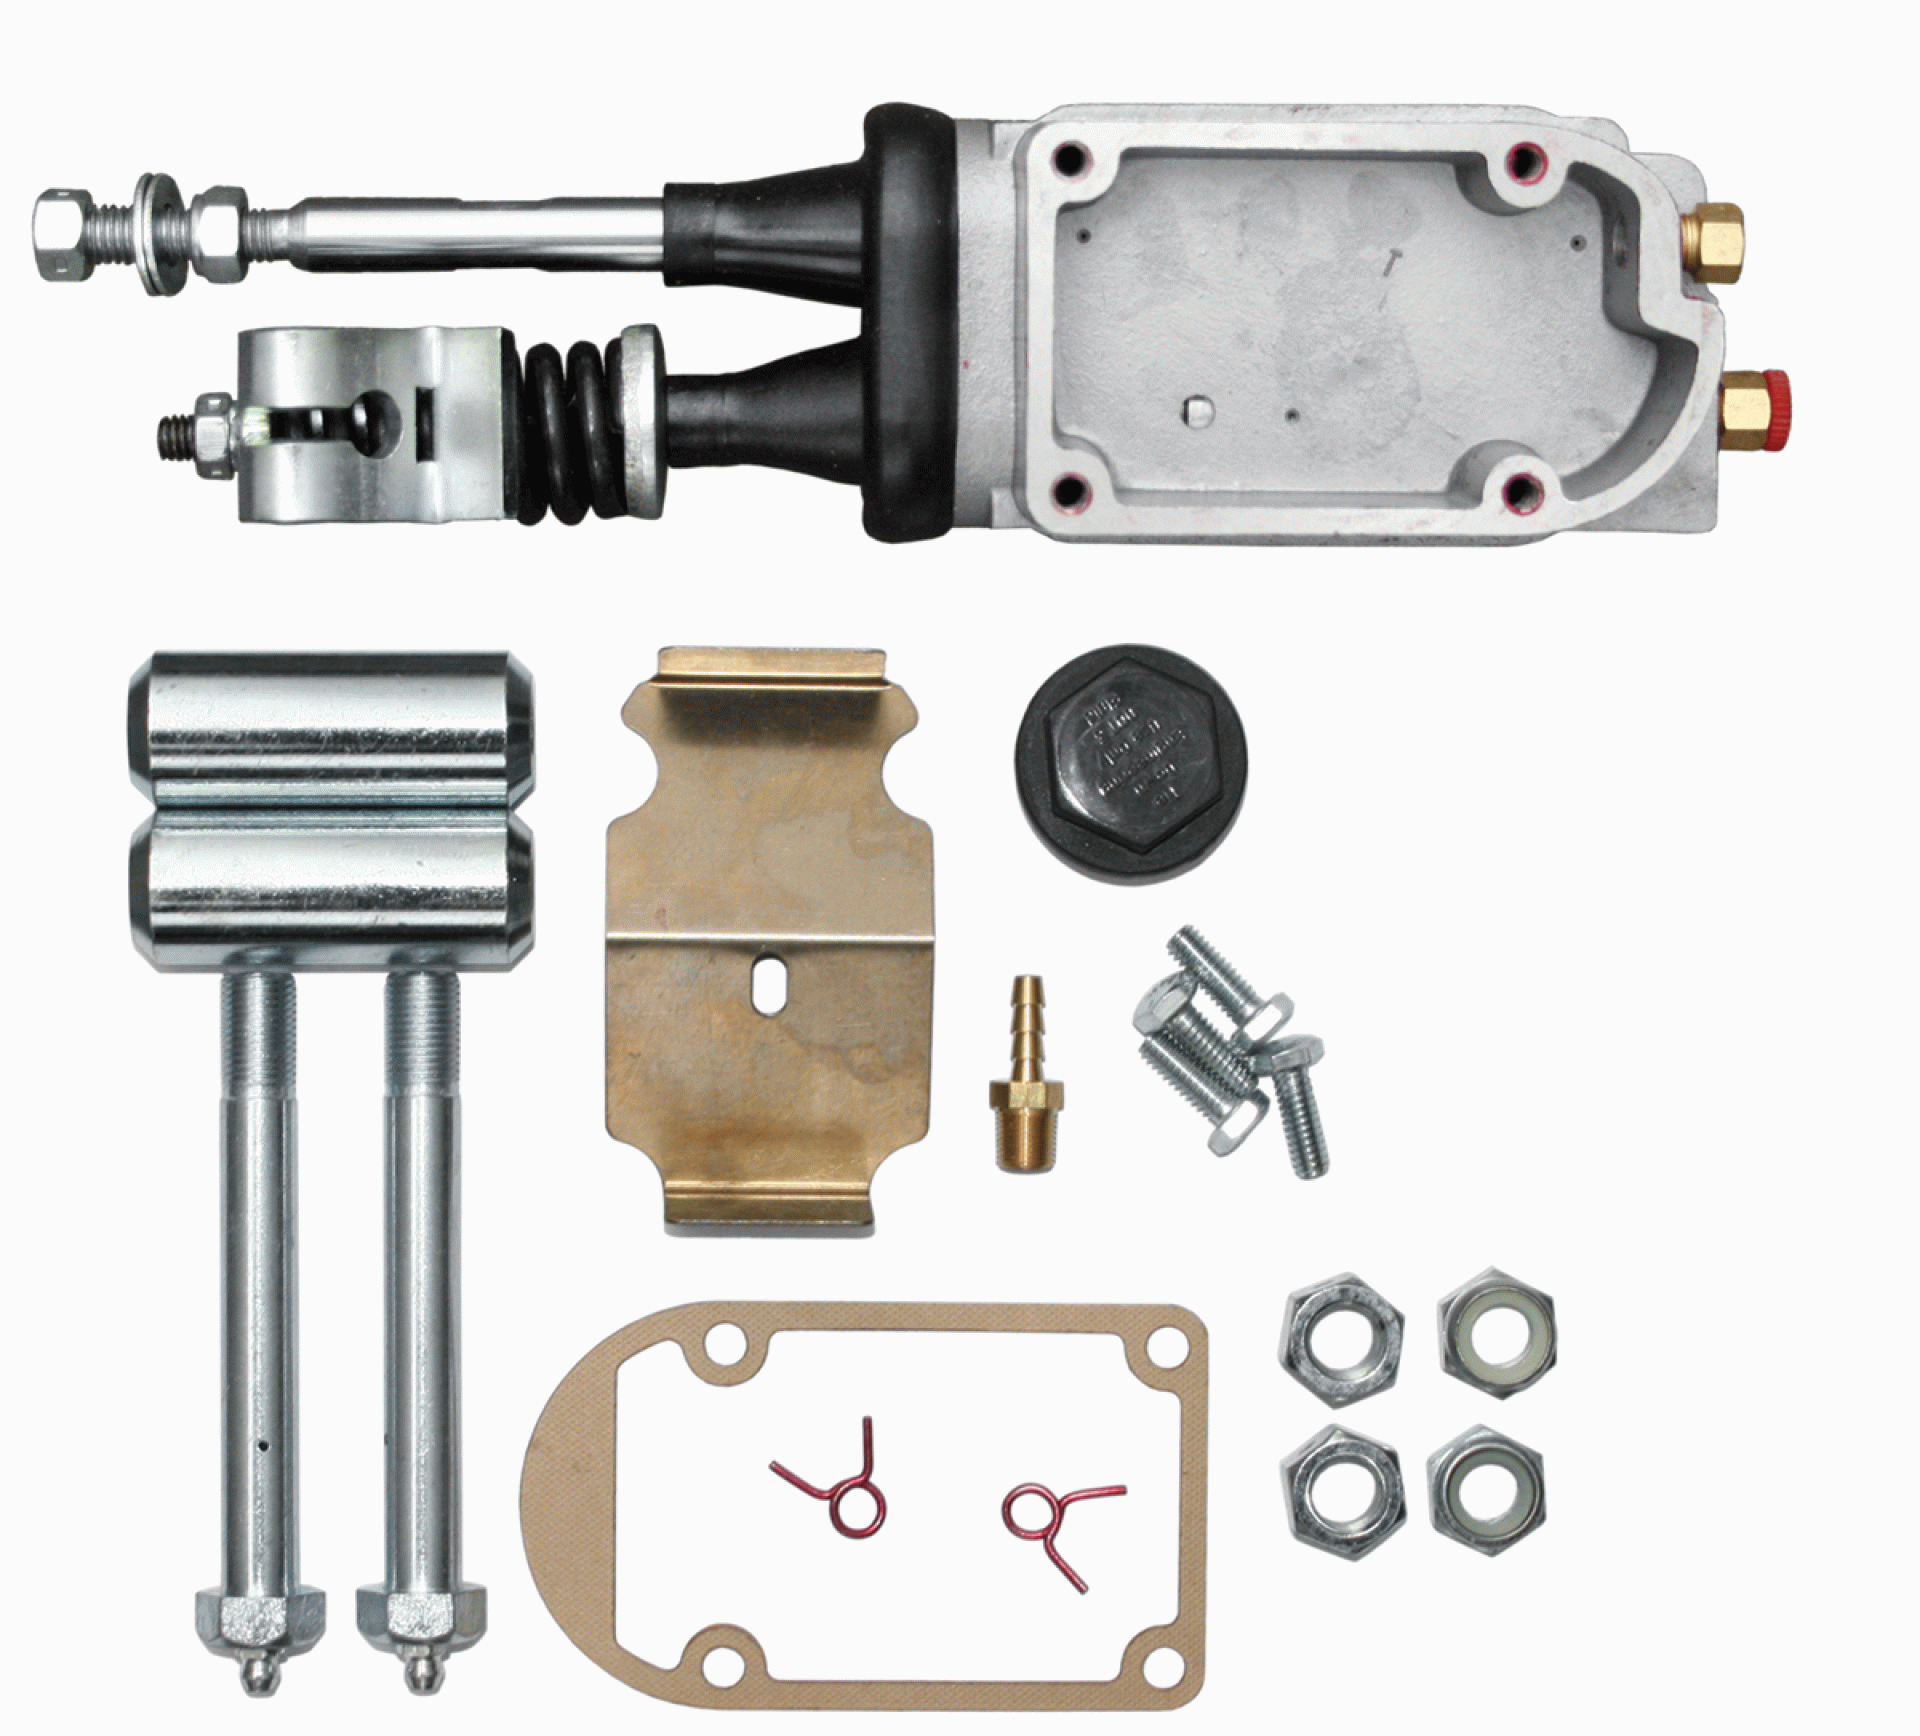 DEXTER MARINE PRODUCTS OF GEORGIA LC | 47260K | ACTUATOR REPAIR KIT FOR DISC MODELS 66 70 AND 80